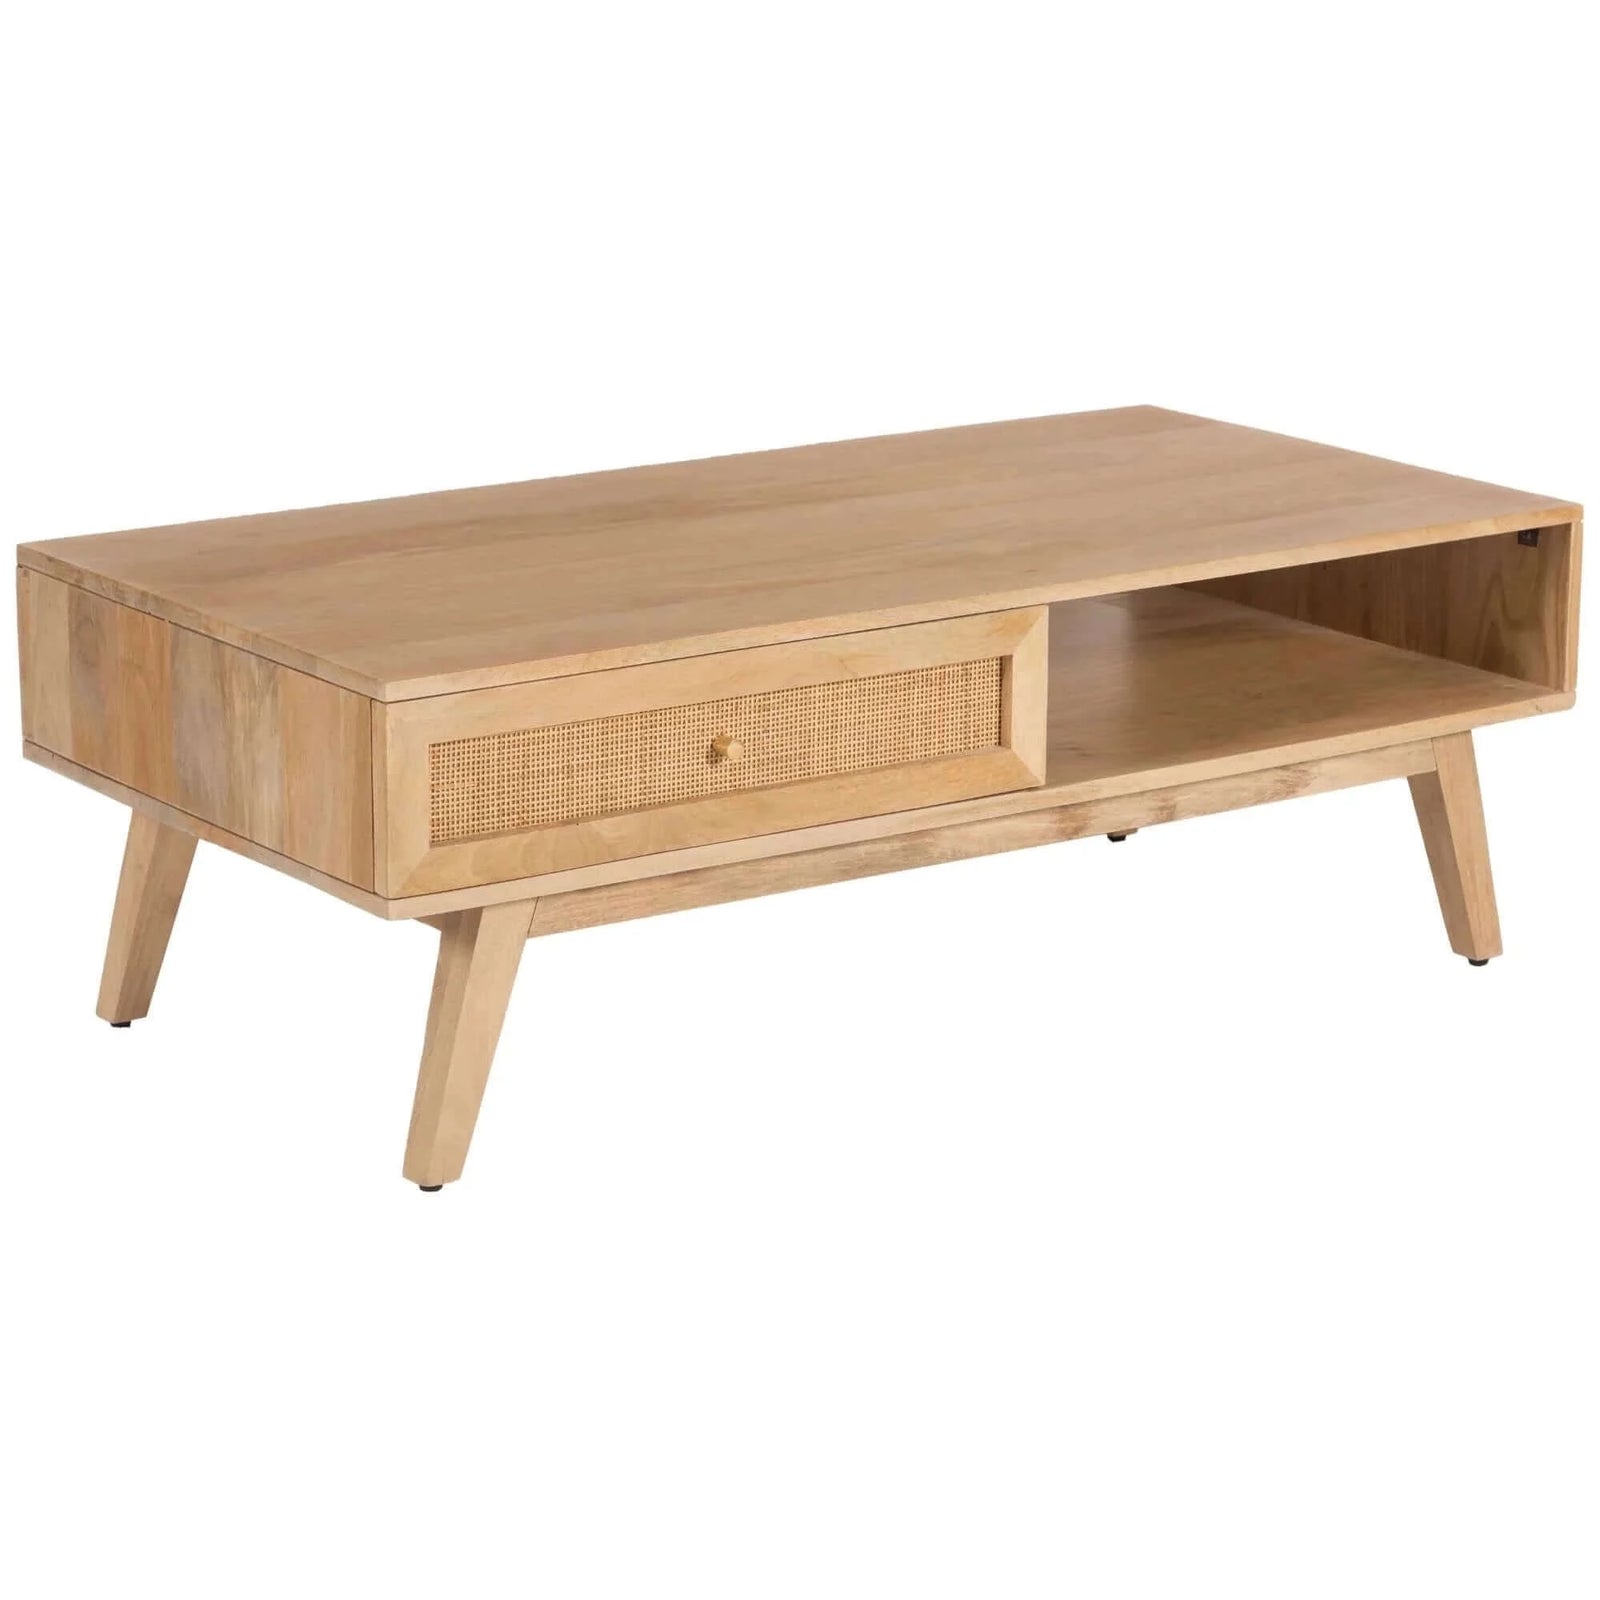 Olearia Coffee Table 120cm Solid Mango Timber Wood Rattan Furniture Natural-Upinteriors